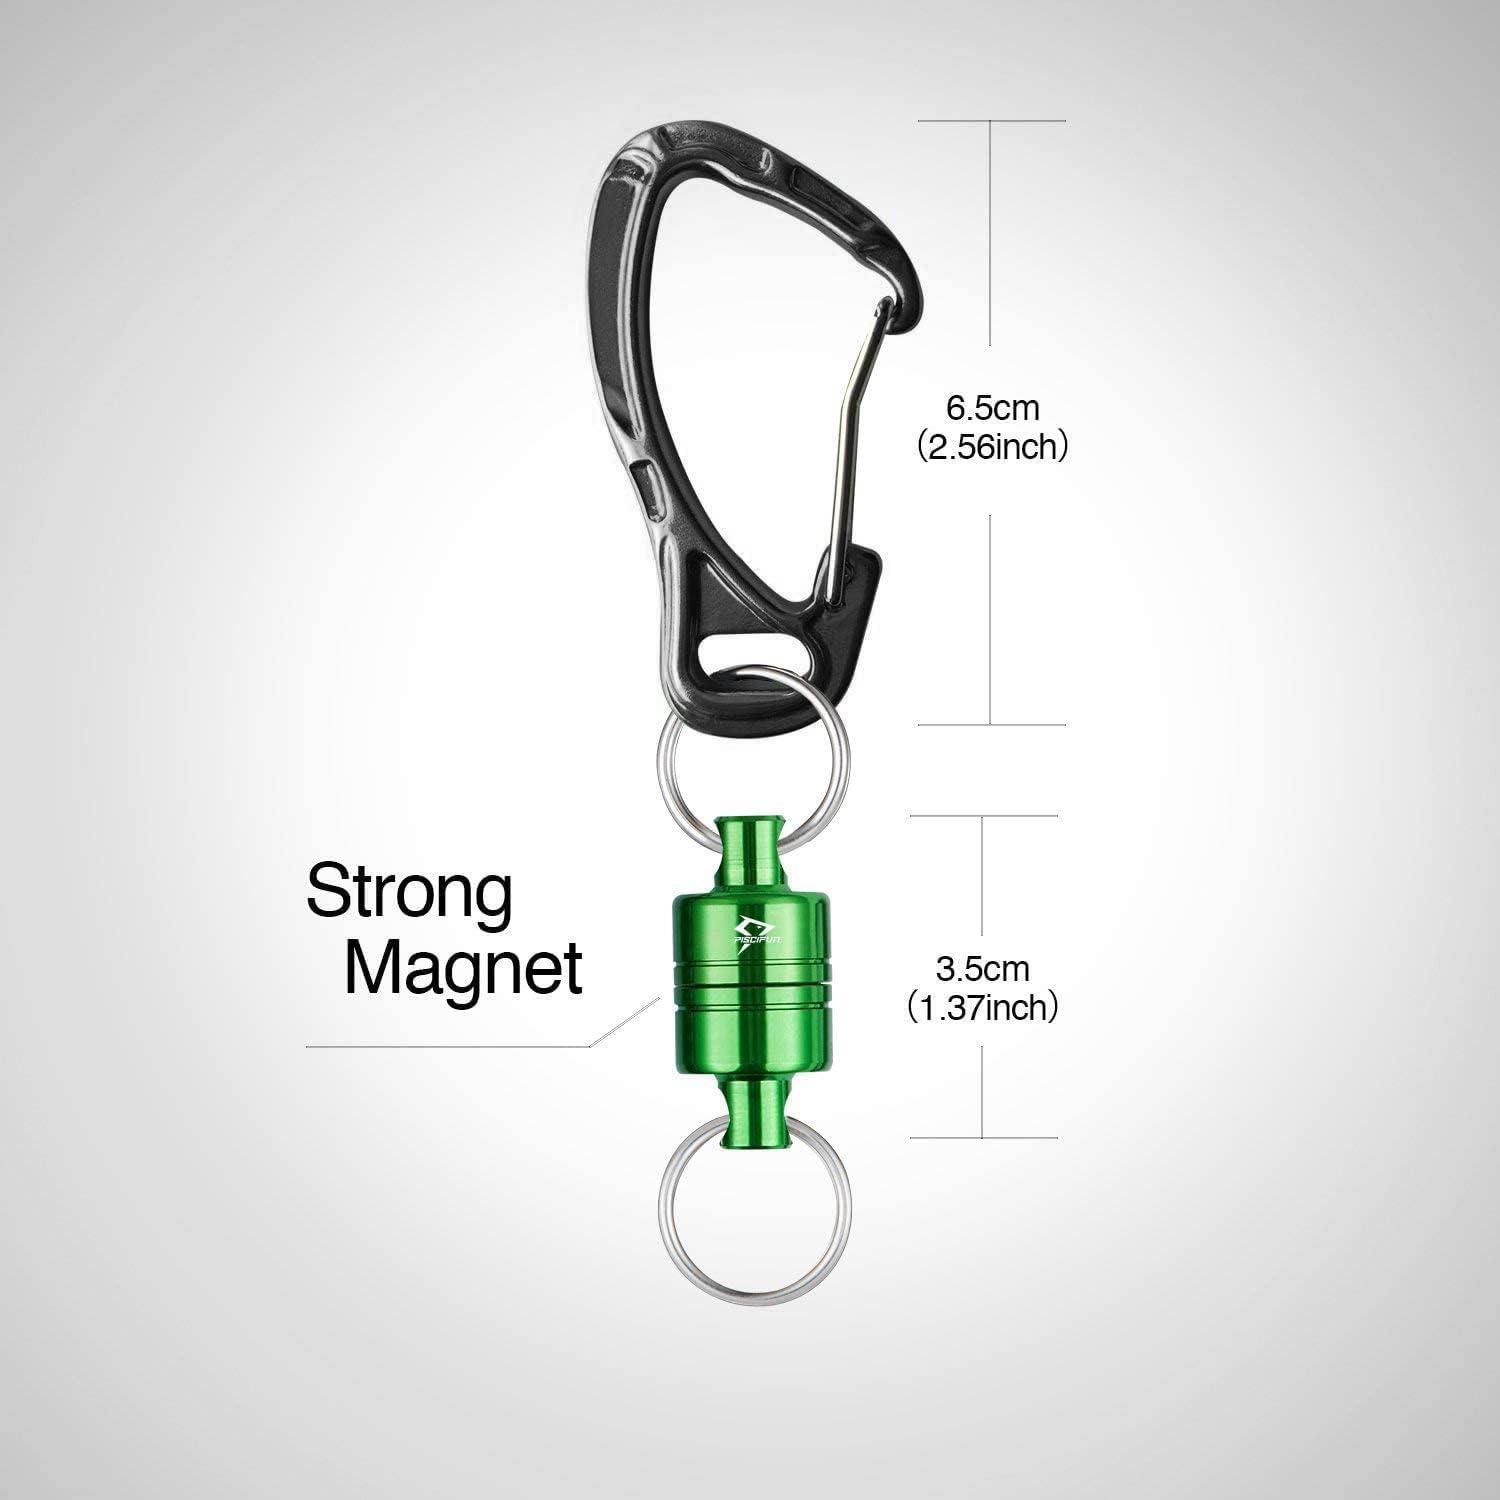 Piscifun Magnetic Net Release for Fly Fishing Magnetic Release